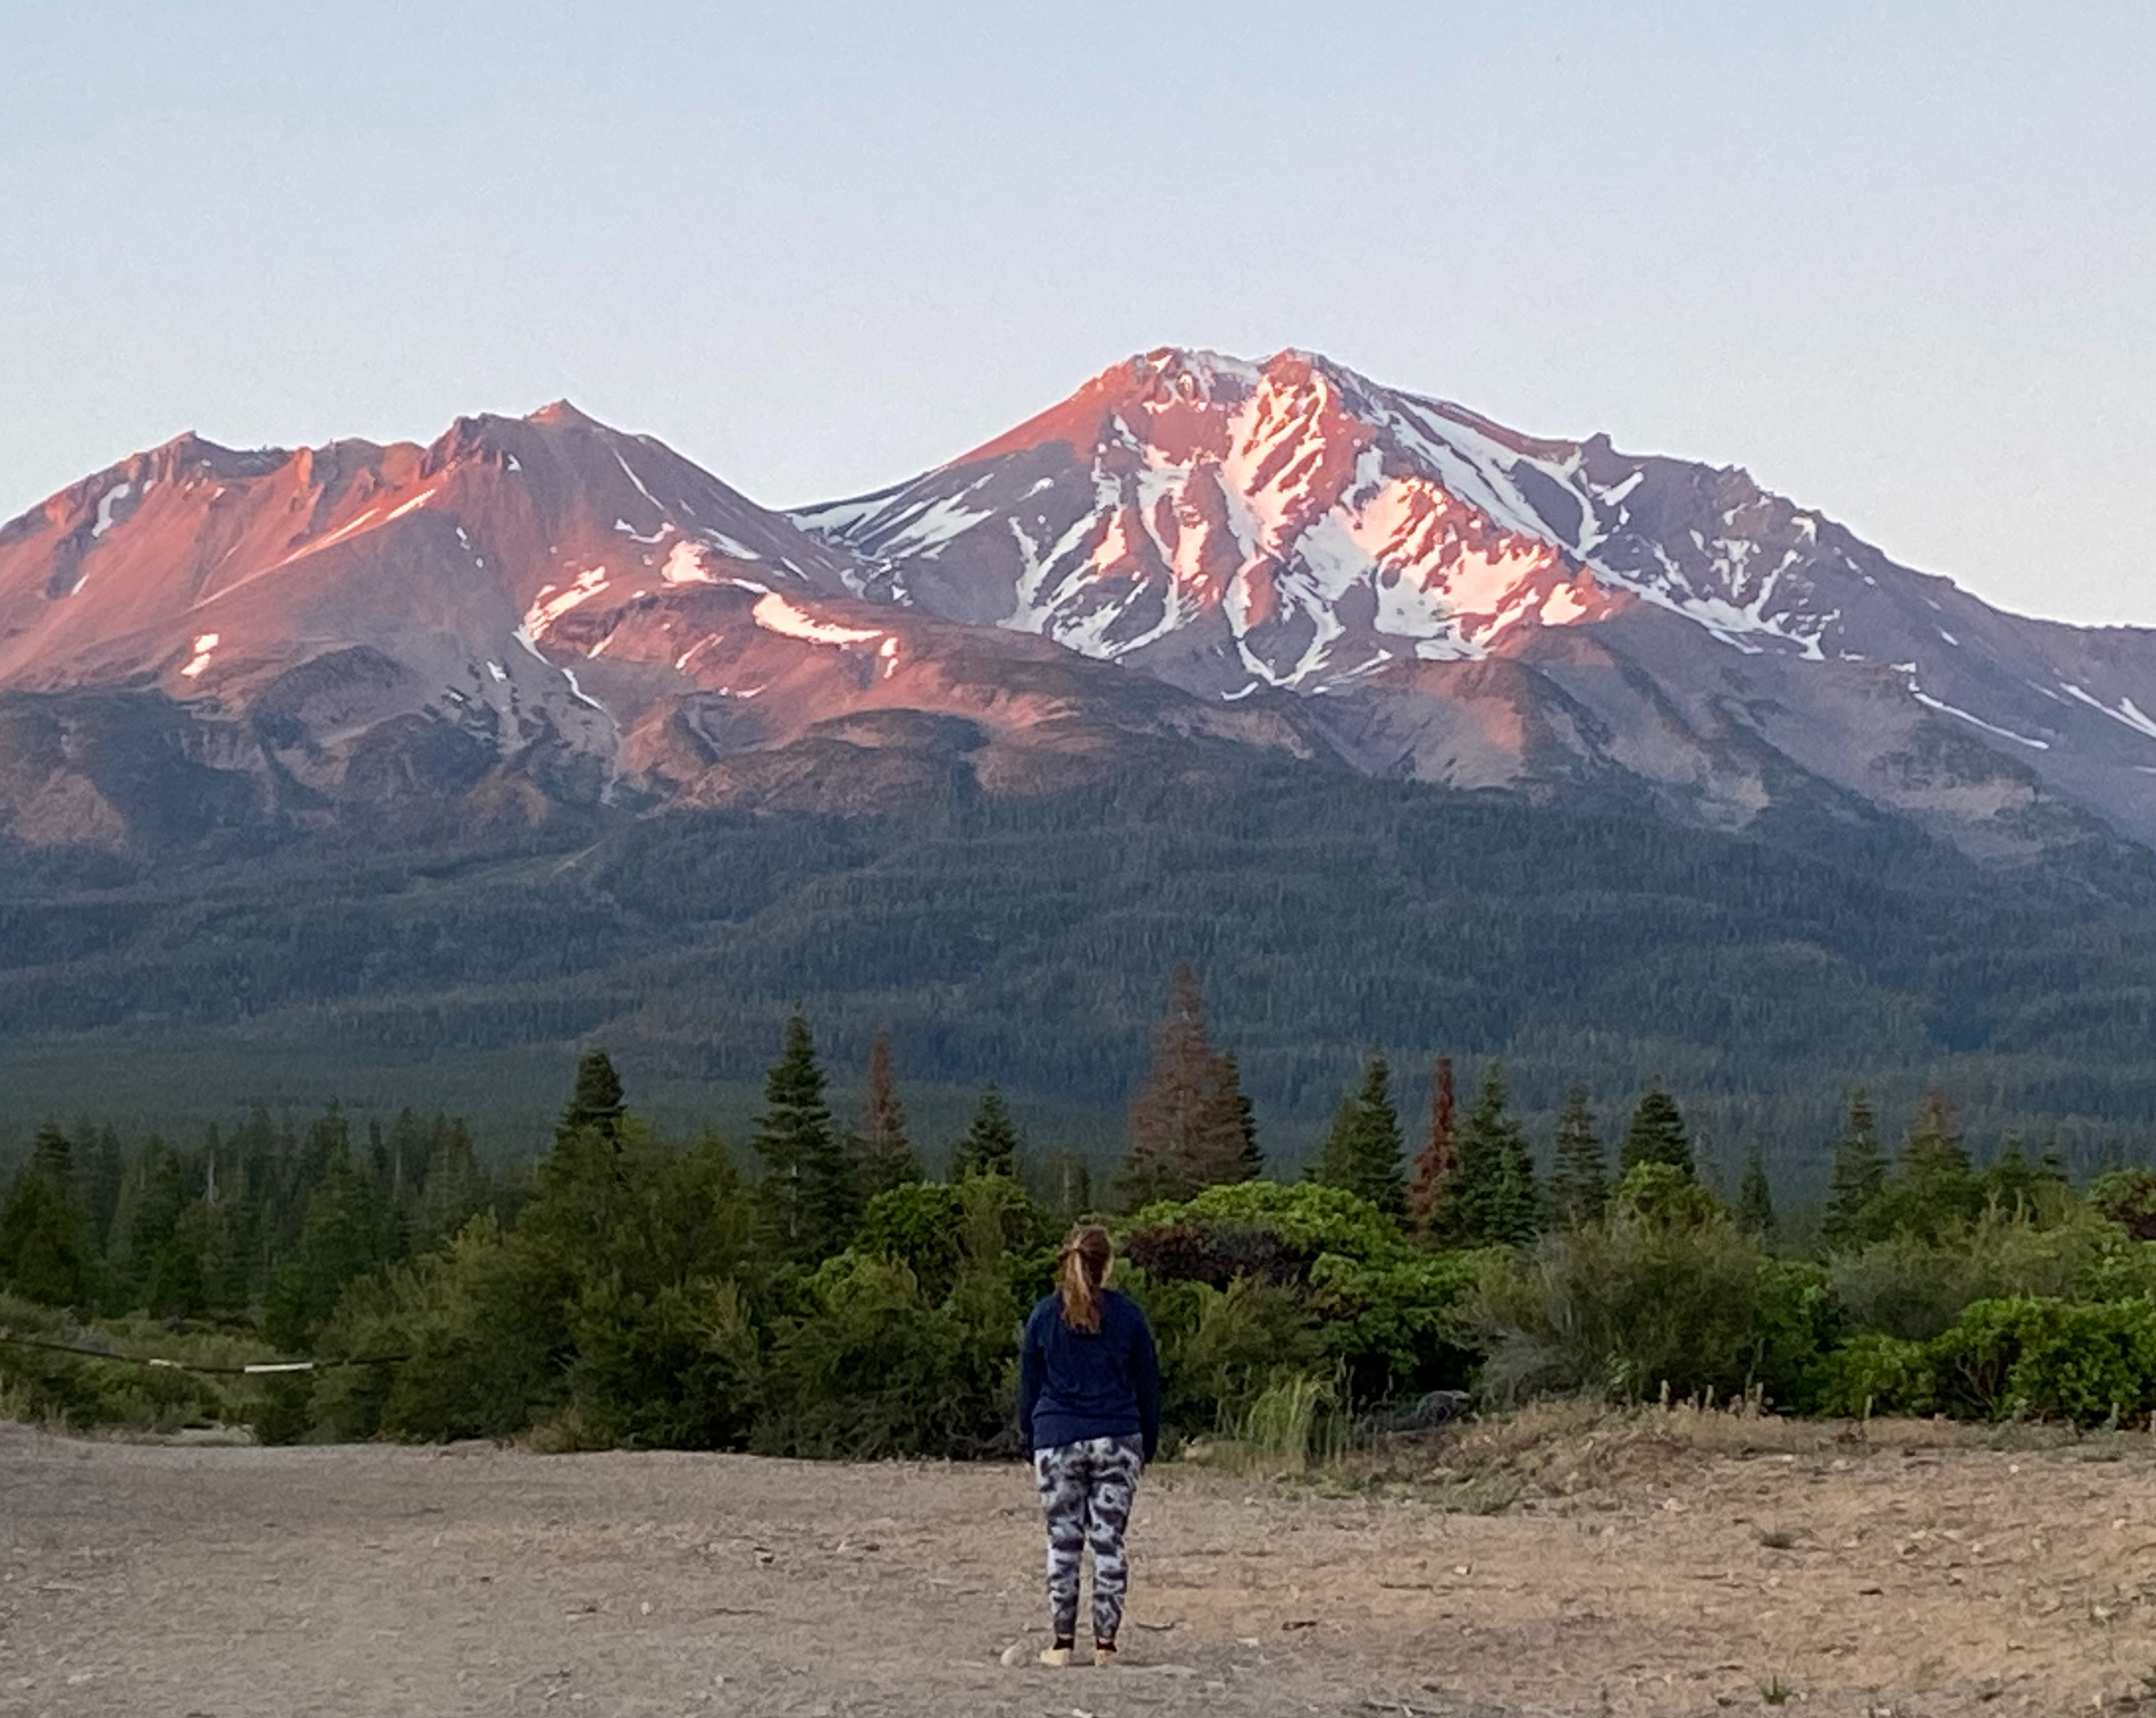 Photograph of the author standing before a snowcapped Mount Shasta, glowing purple in the evening light.

"The hope is there, burning low and persistent.: